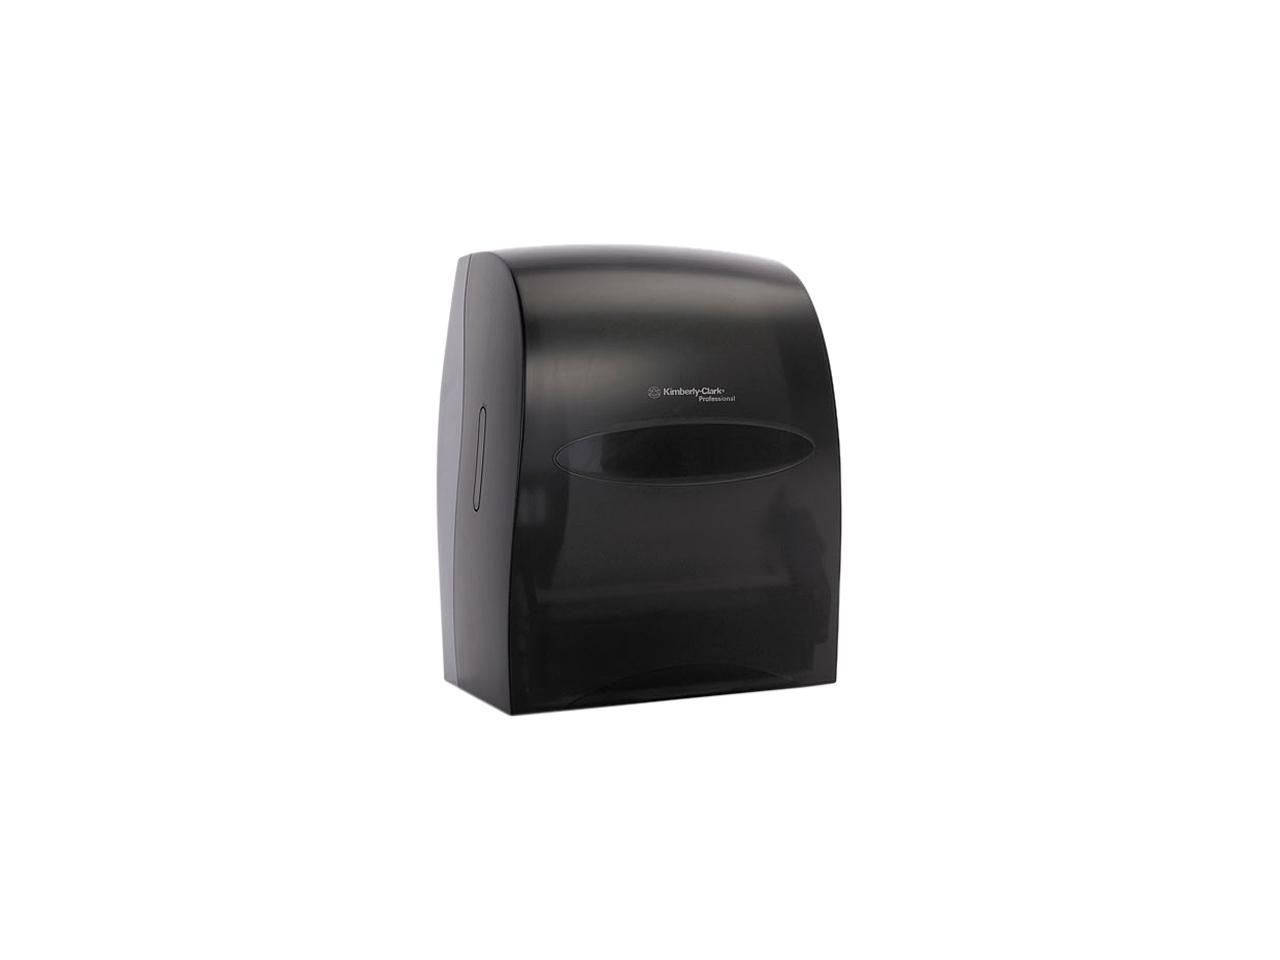 Kimberly Clark Electronic Touchless Roll Towel Dispenser 09992